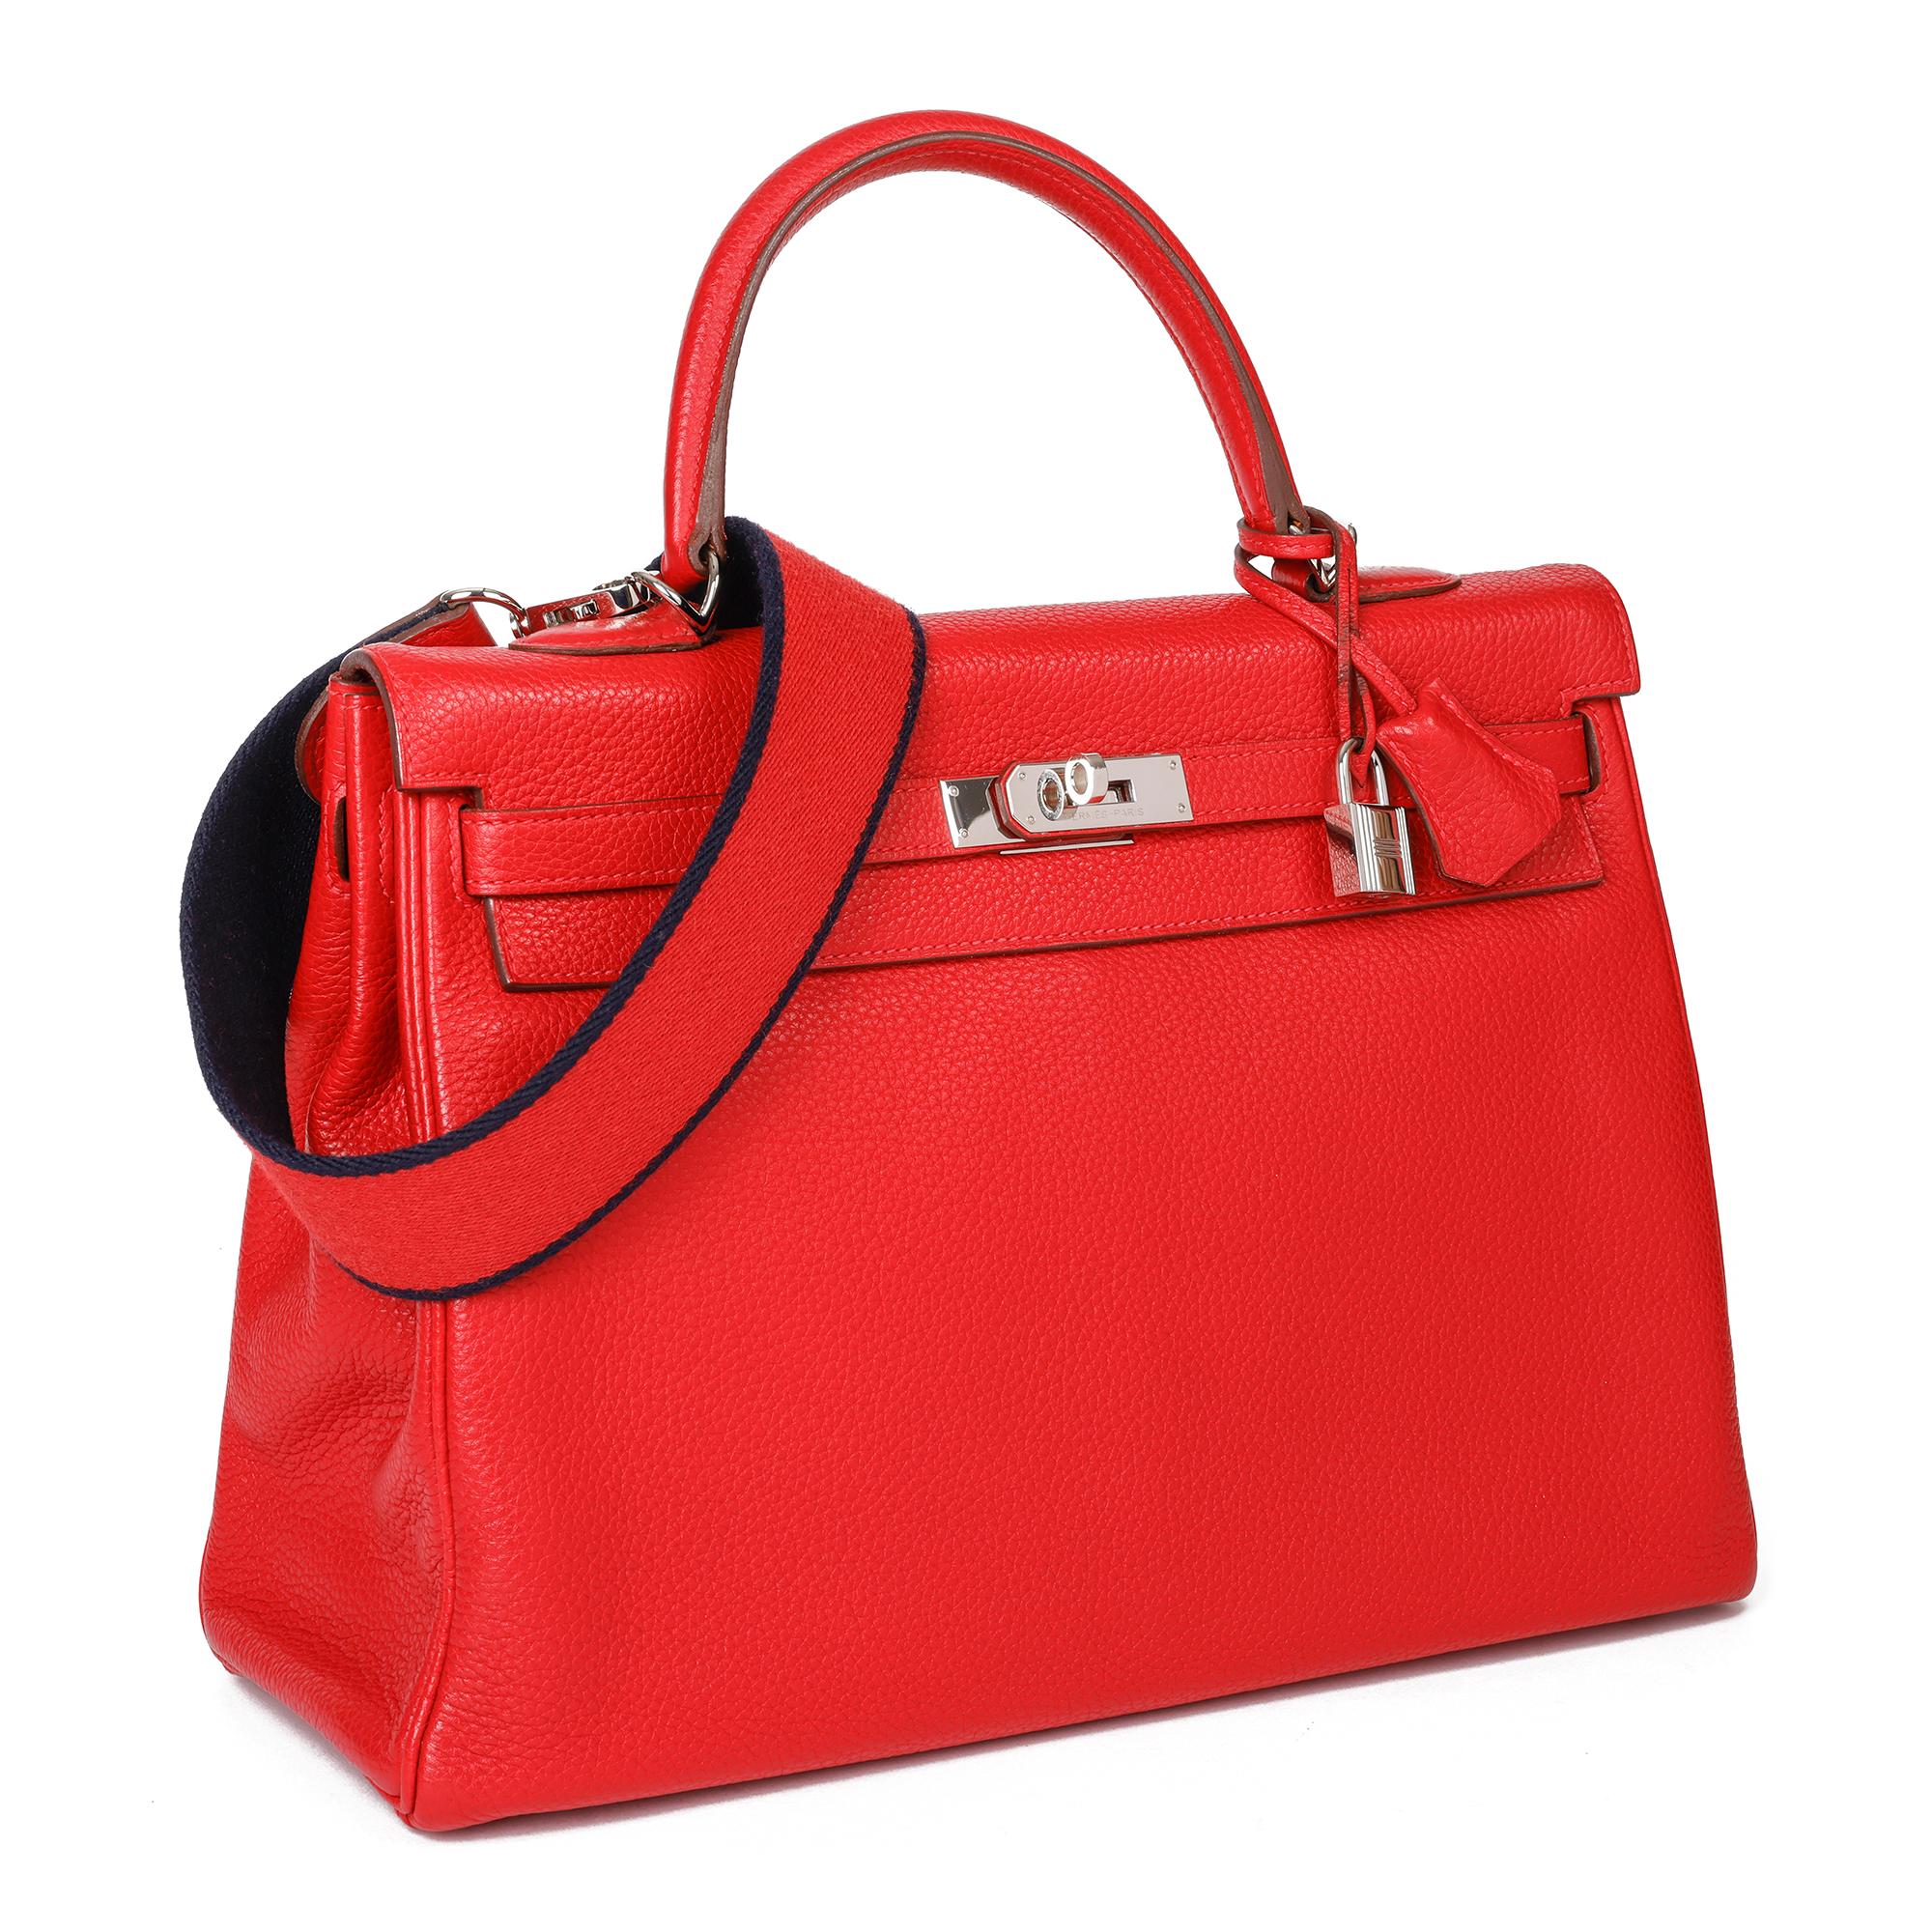 HERMÈS
Rouge Casaque Togo Leather Kelly 35cm 

Xupes Reference: CB346
Serial Number: [P]
Age (Circa): 2012
Accompanied By: Hermès Box, Dust Bag, Lock, Keys, Clochette, Shoulder Strap
Authenticity Details: Date Stamp (Made in France)
Gender: